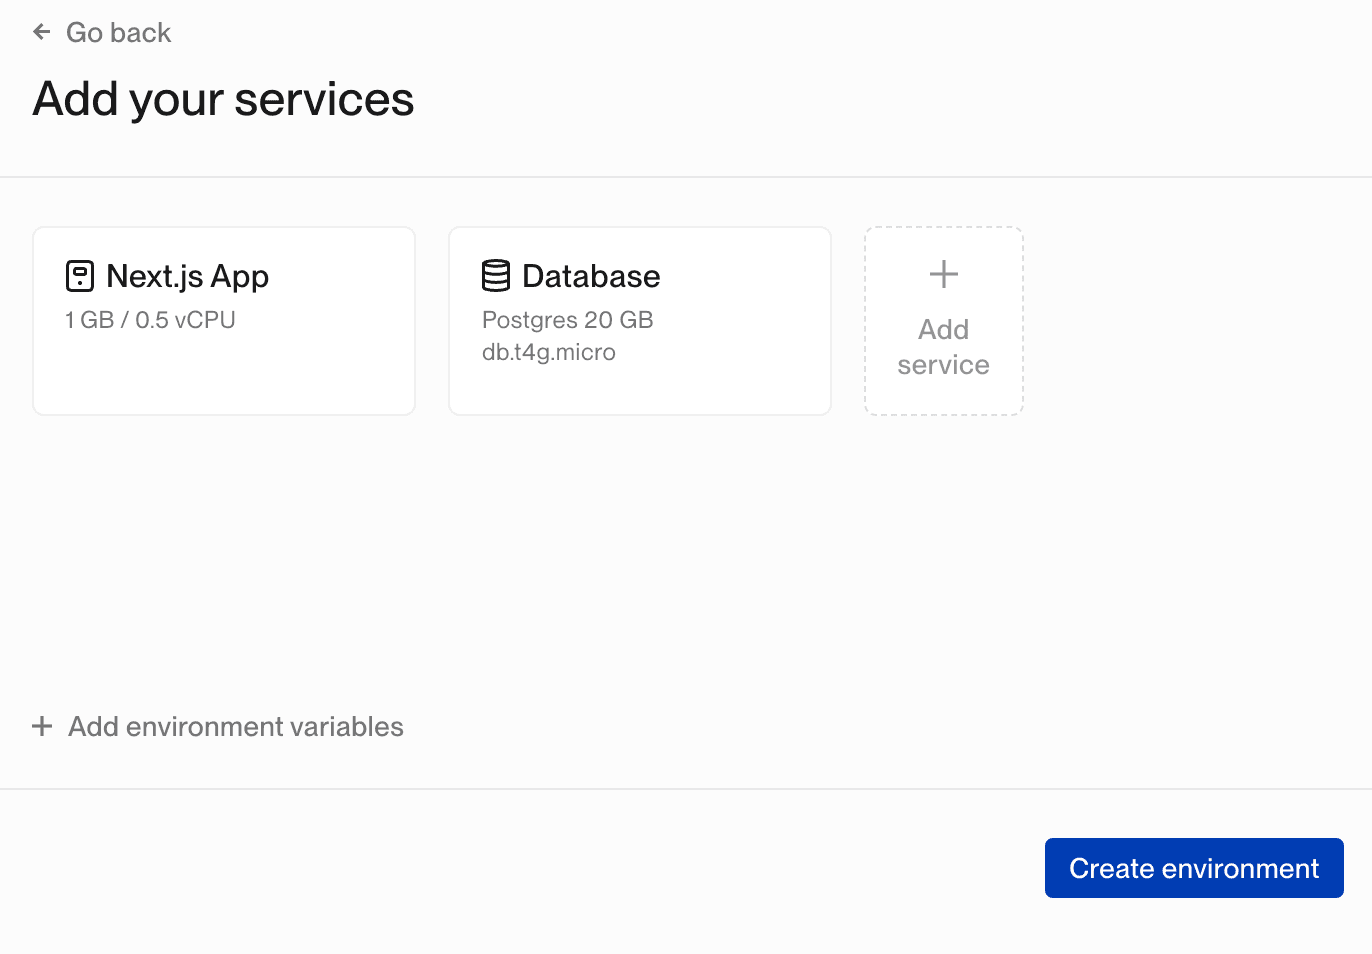 Add your services dialog box